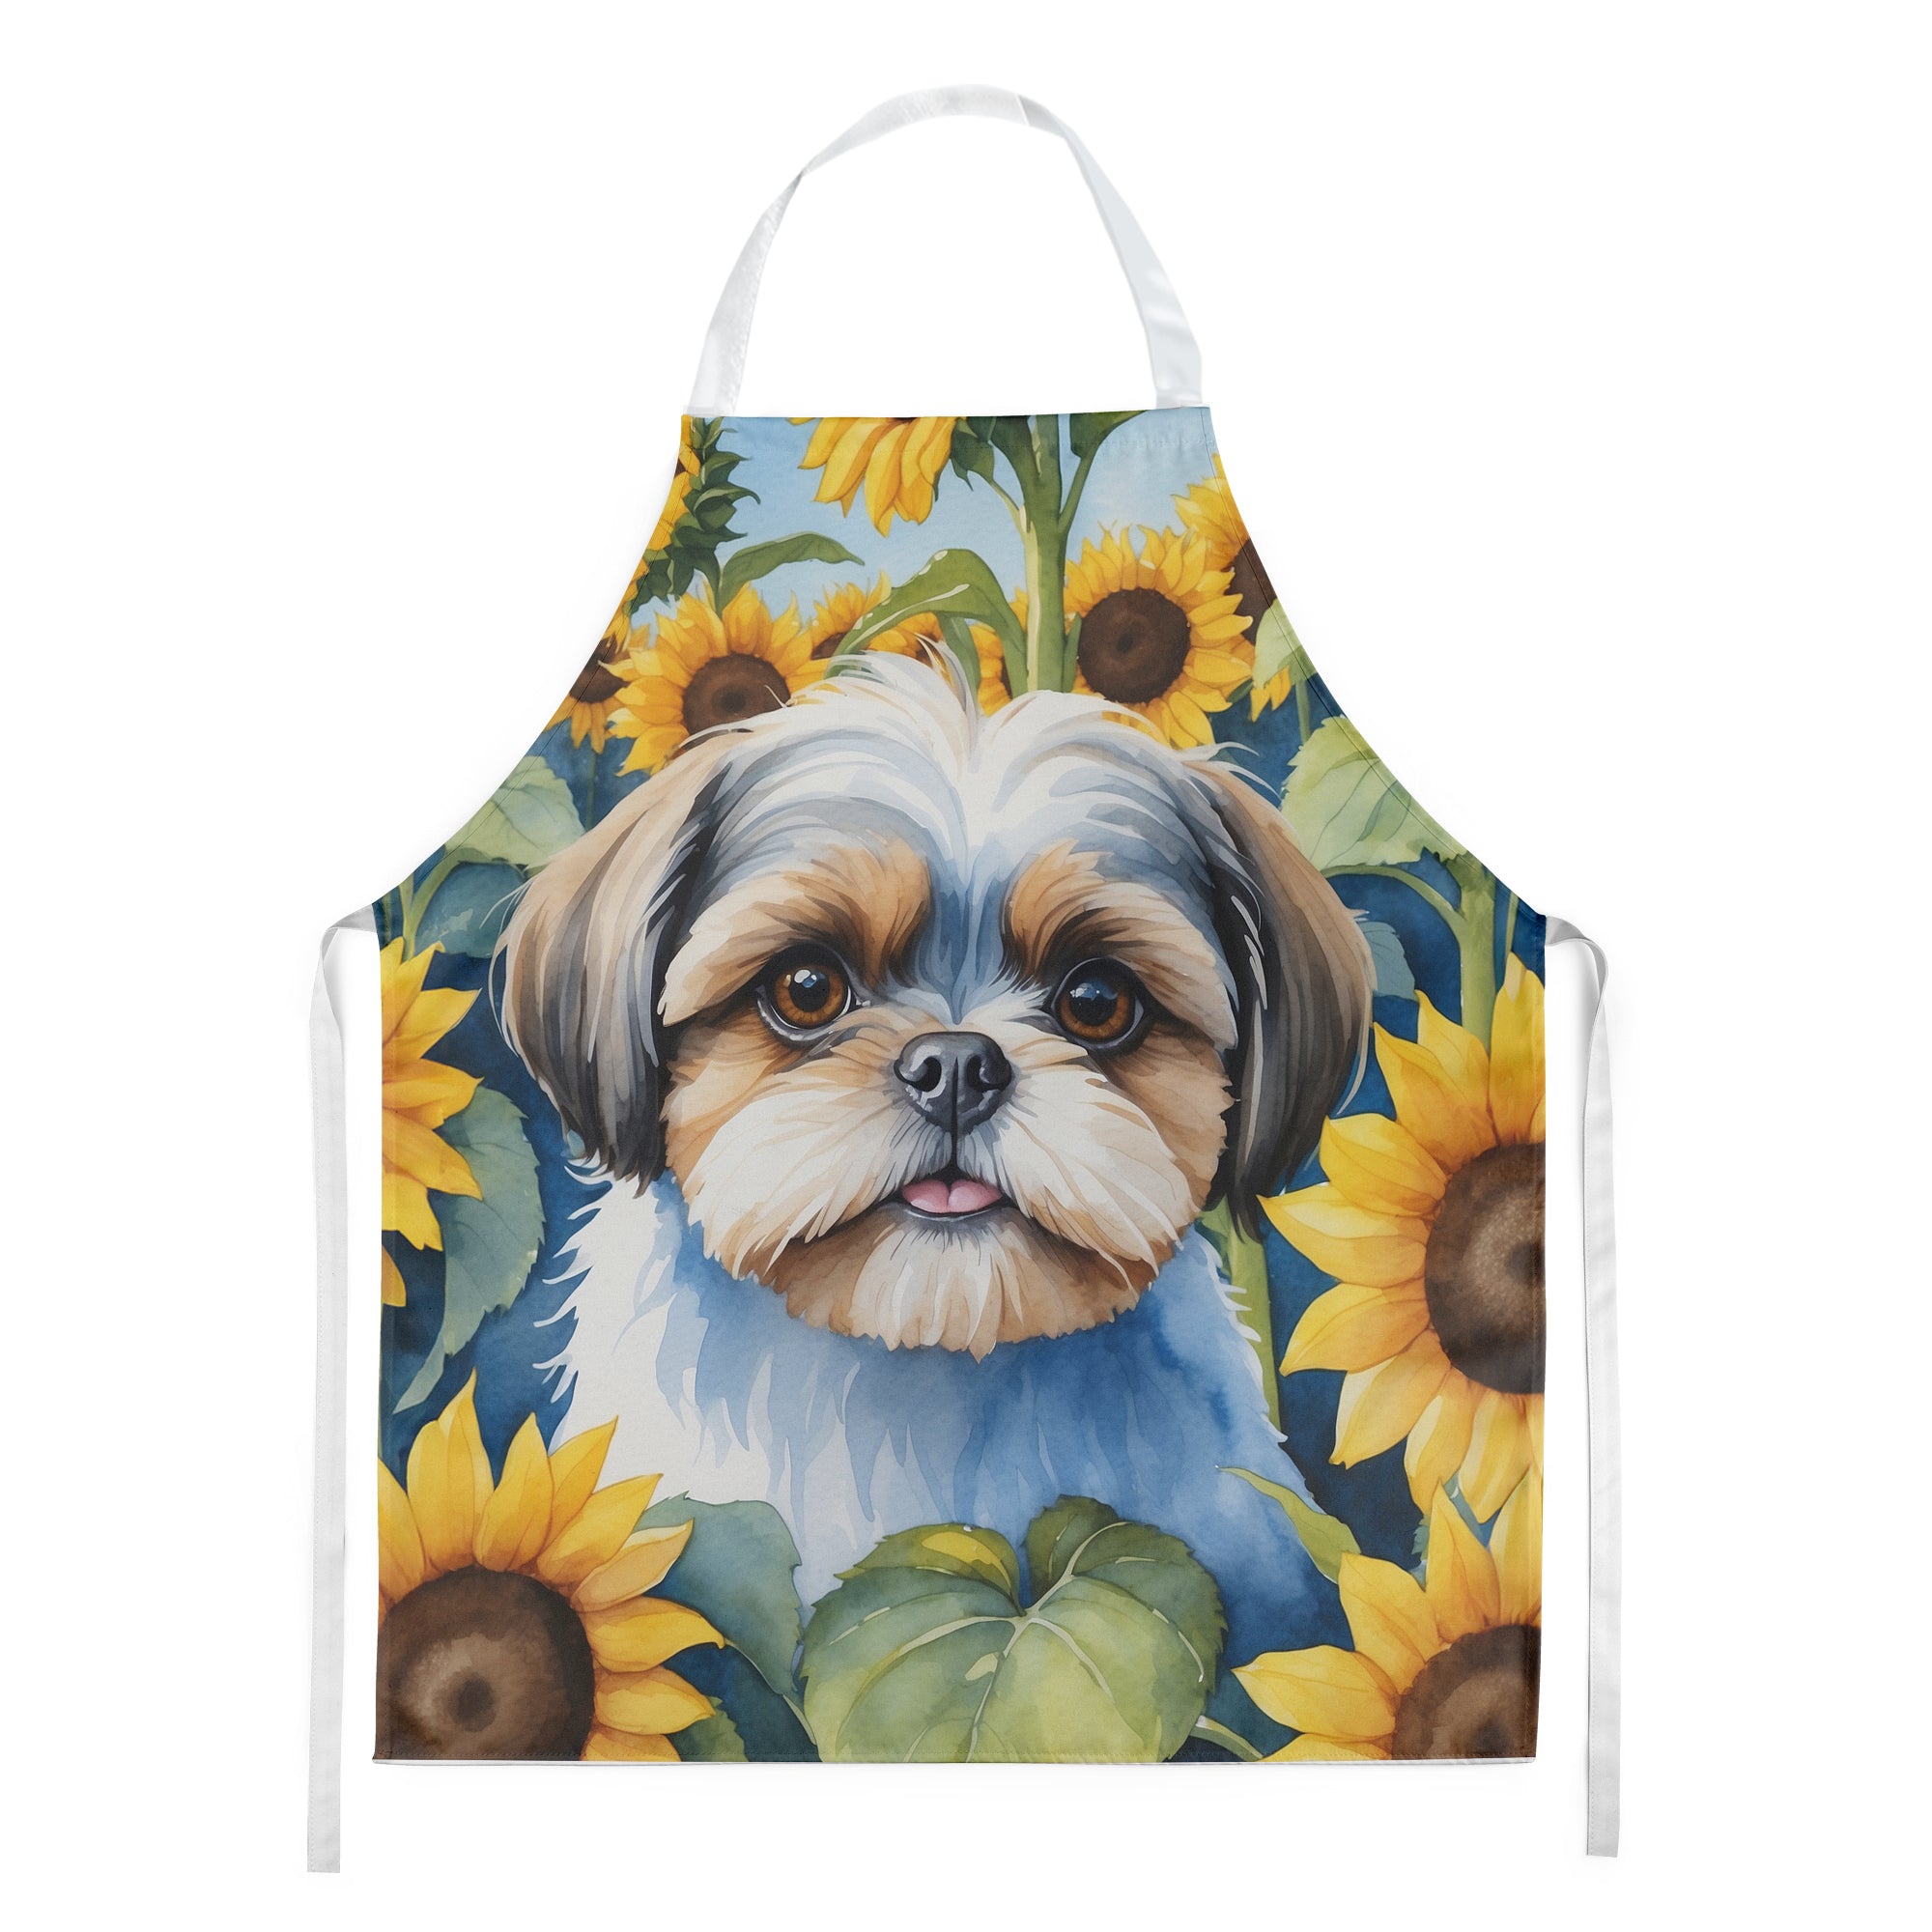 Buy this Shih Tzu in Sunflowers Apron